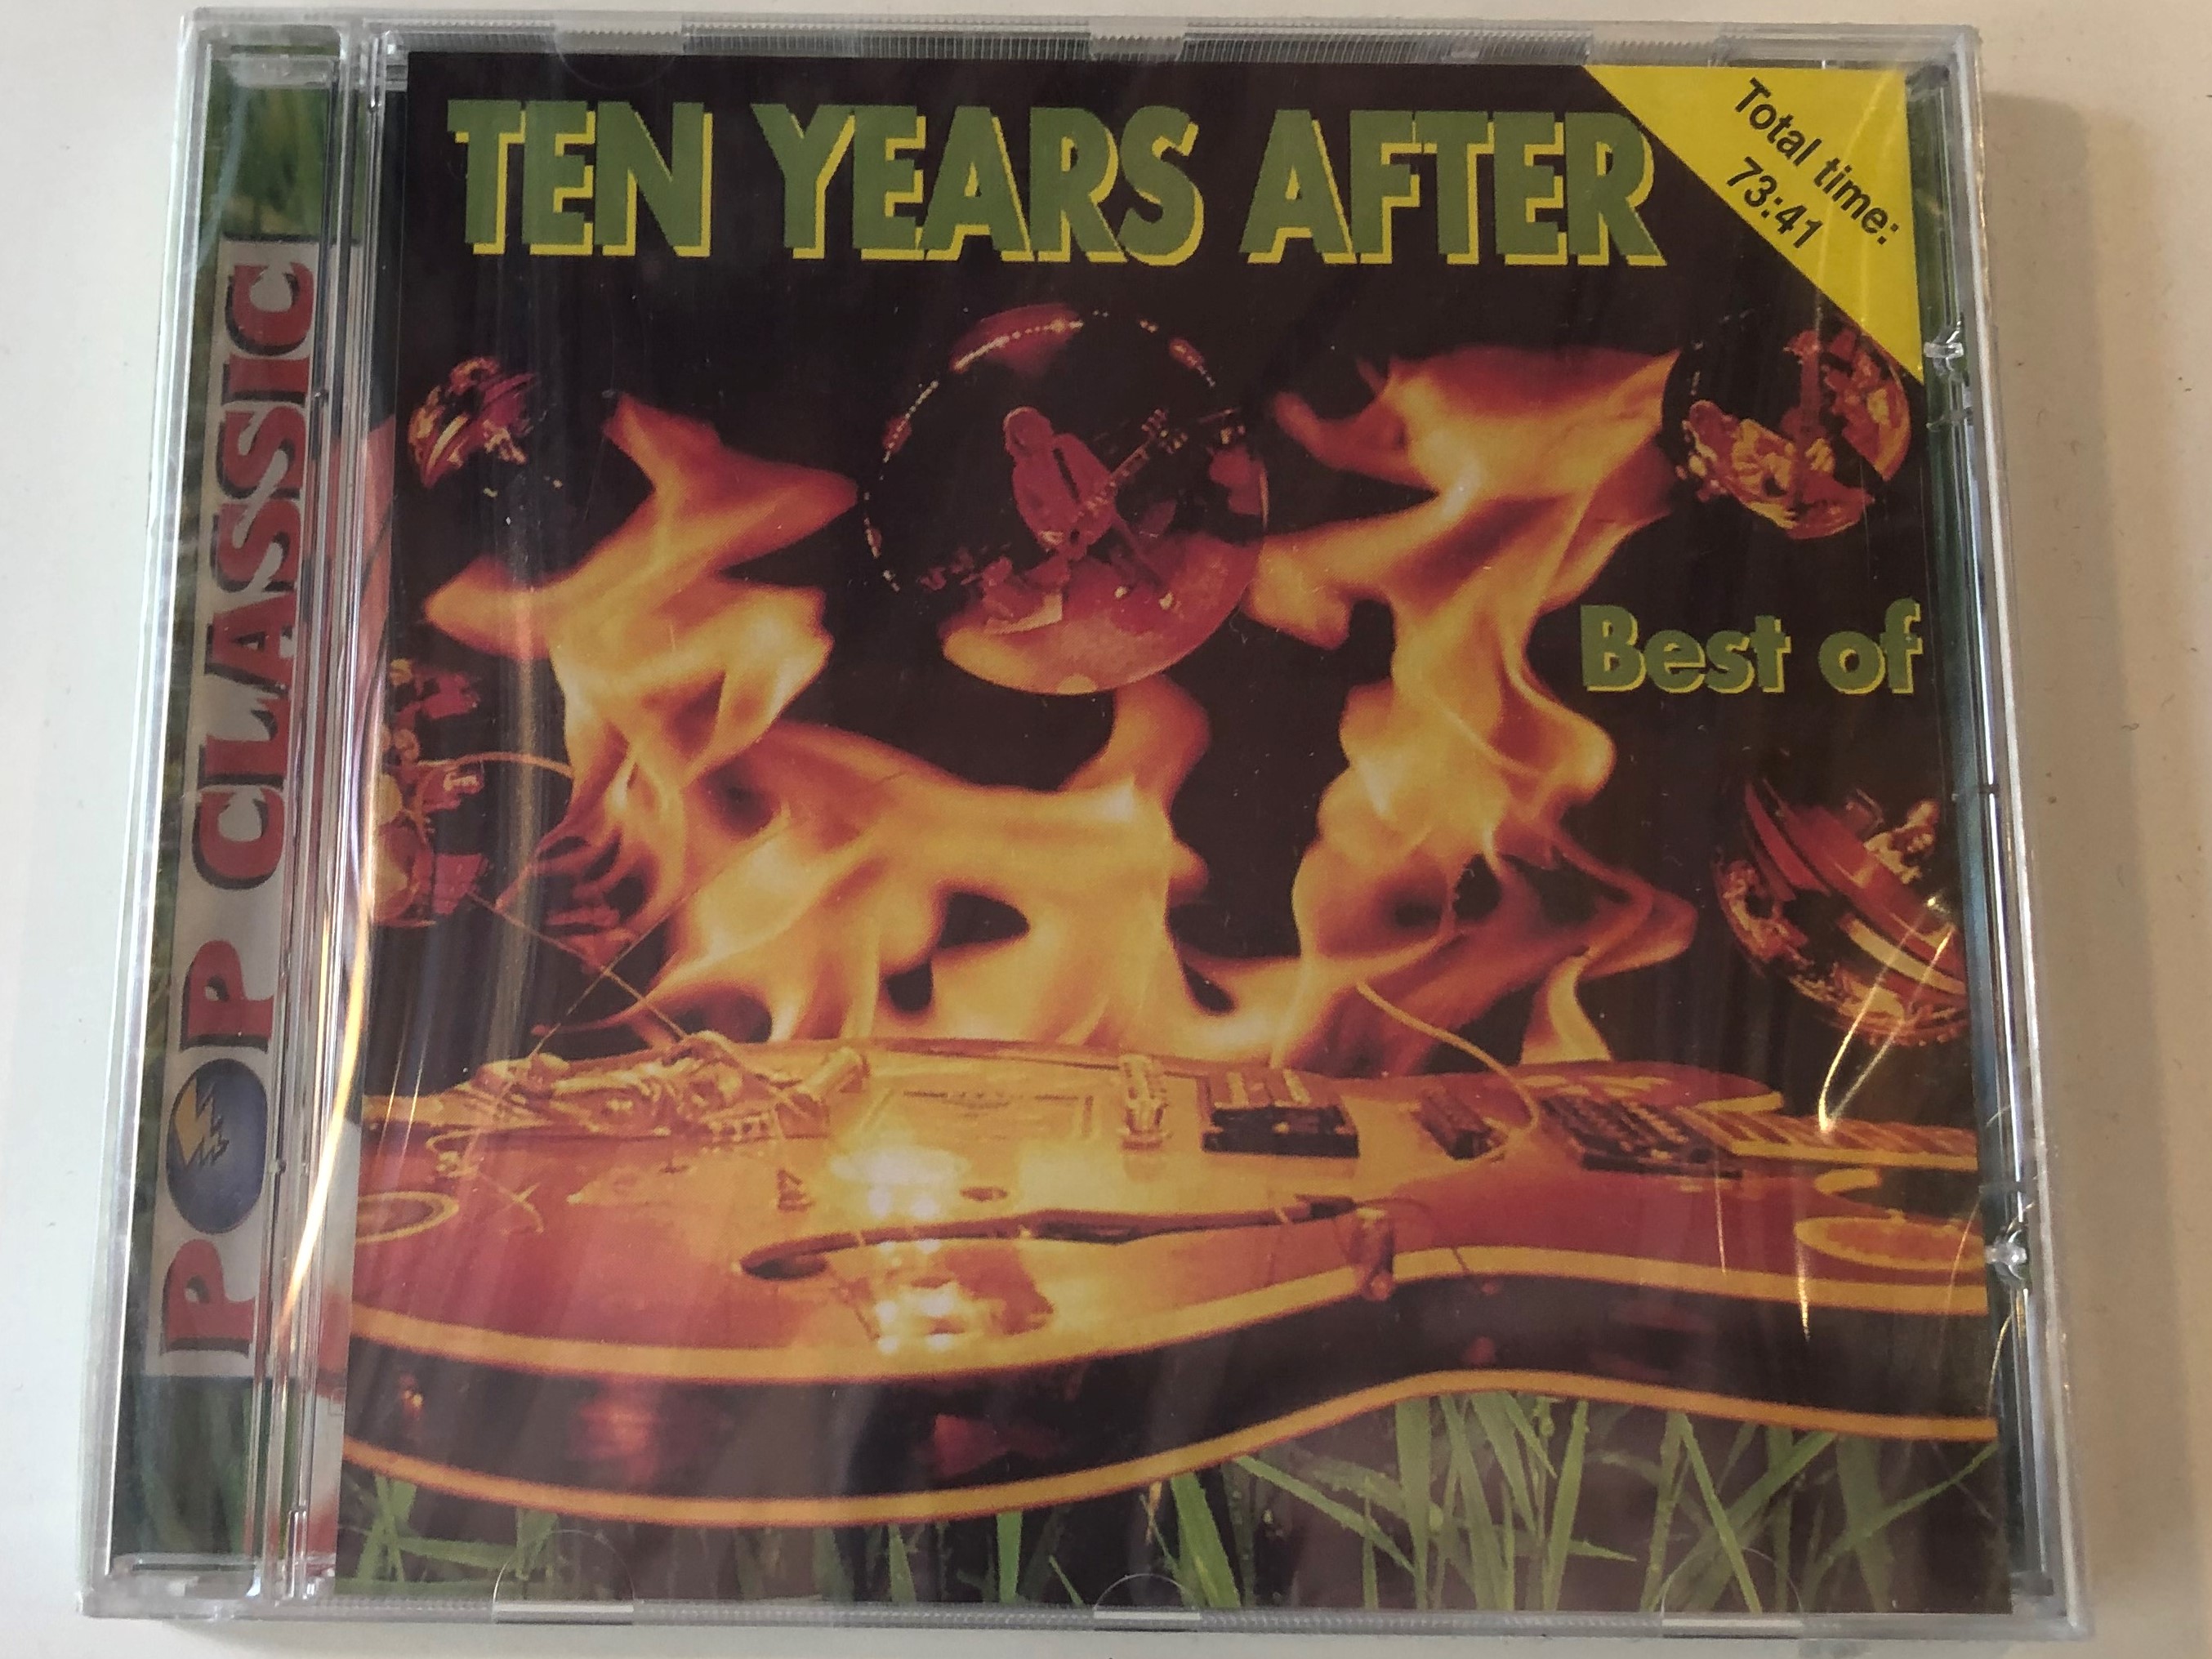 ten-years-after-best-of-total-time-7341-pop-classic-euroton-audio-cd-5998490700195-1-.jpg